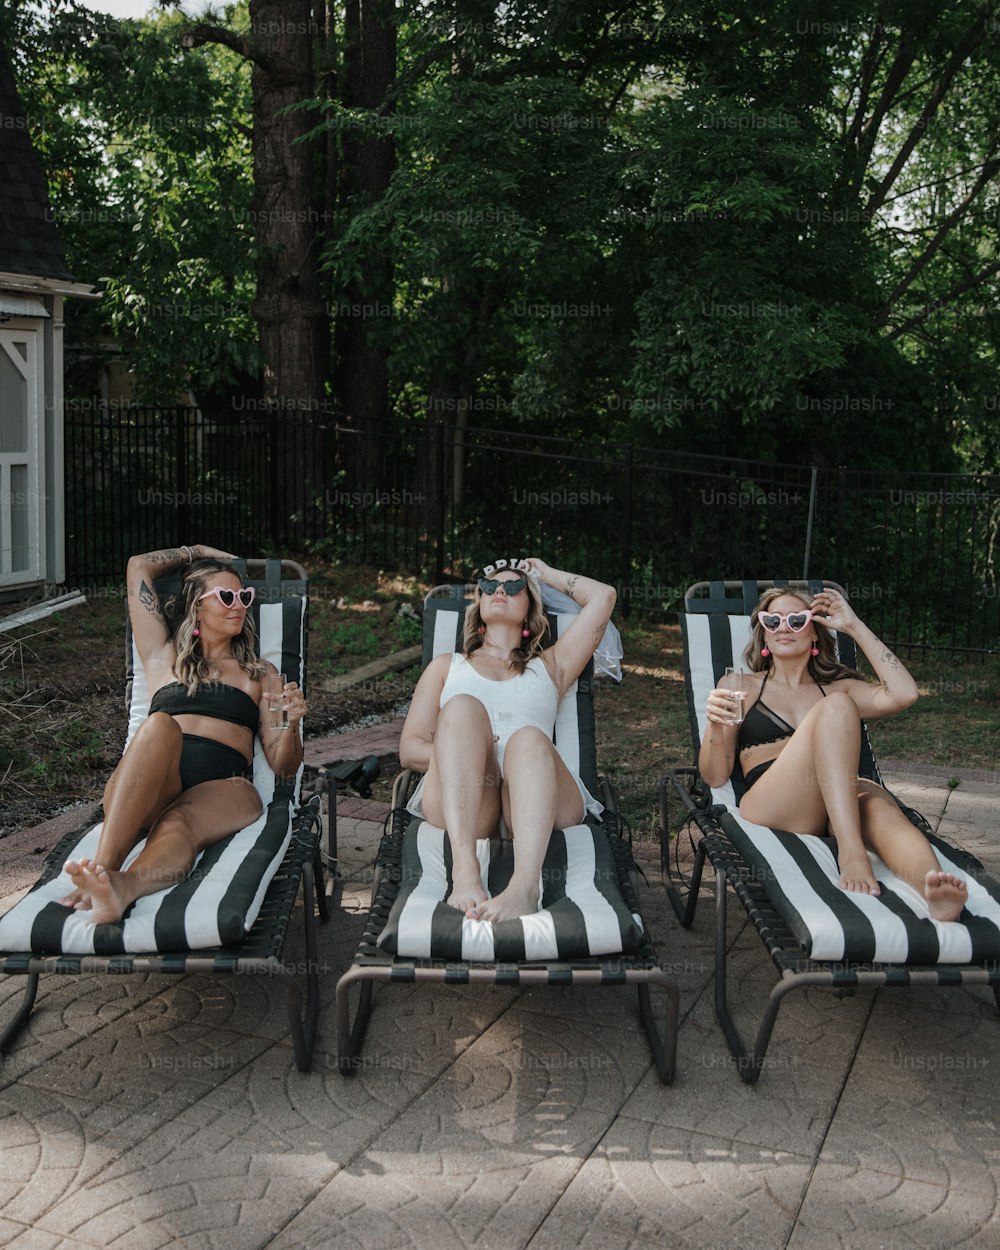 three women in bathing suits lounging on lounge chairs